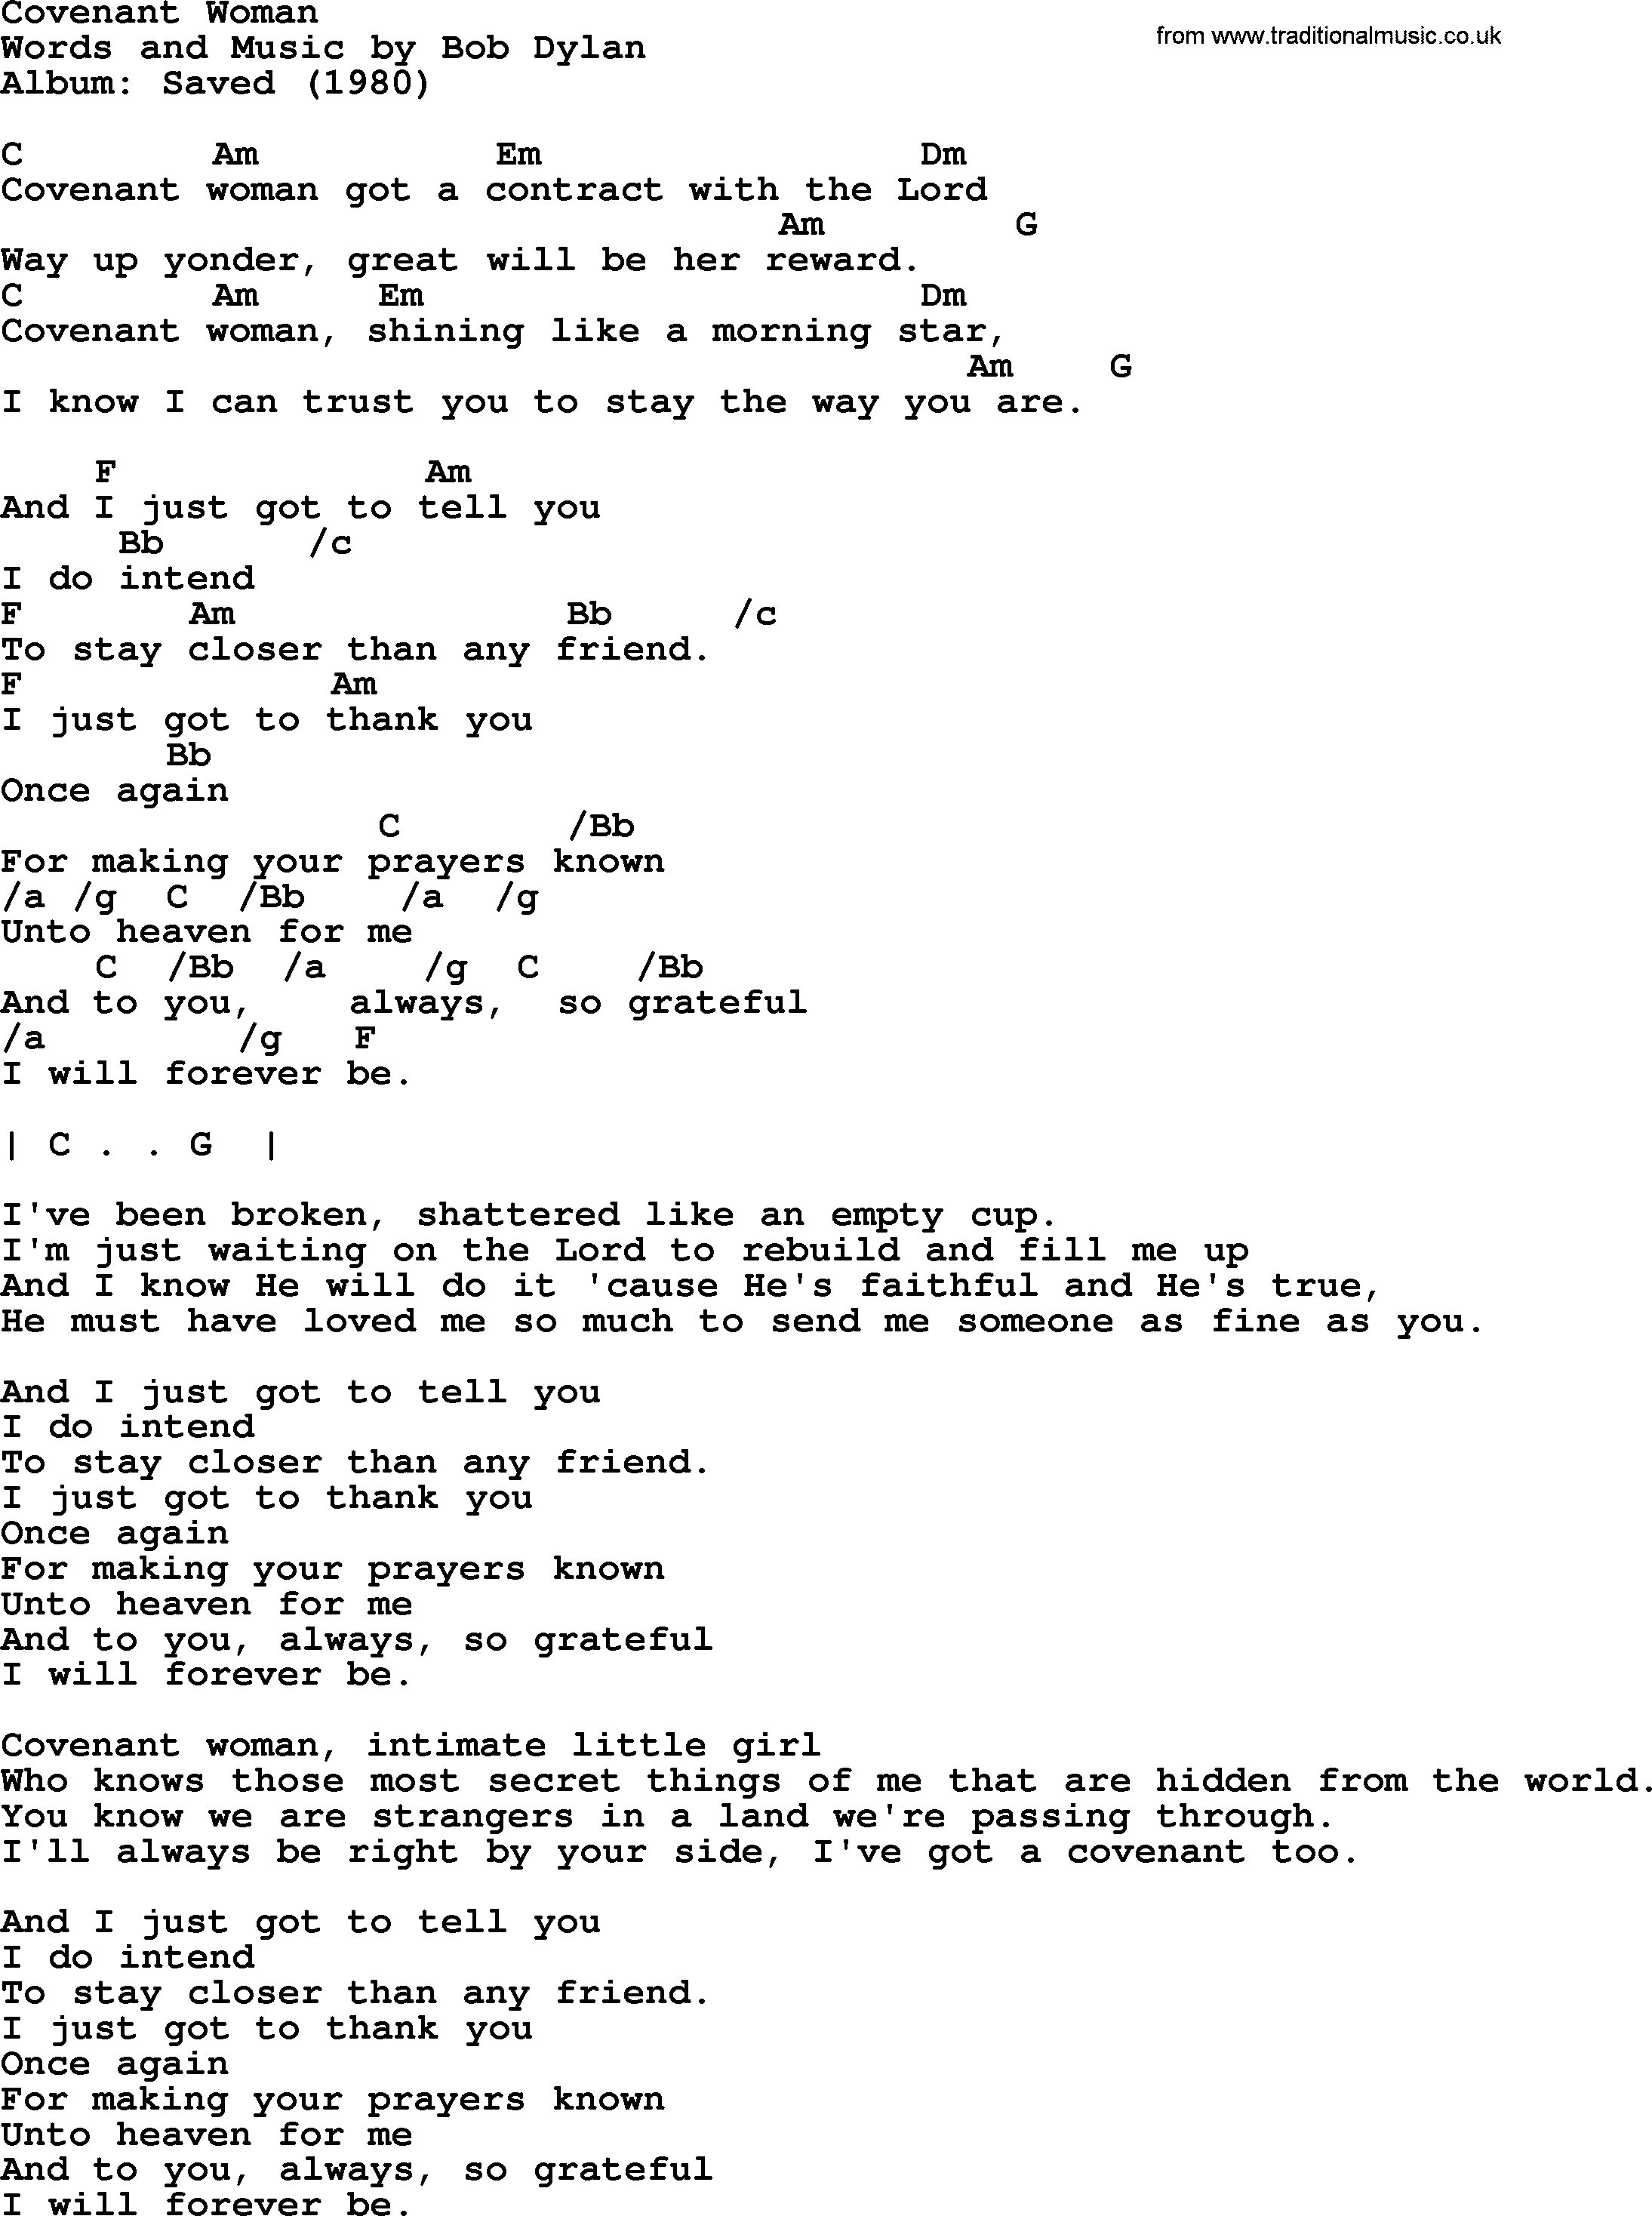 Bob Dylan song, lyrics with chords - Covenant Woman